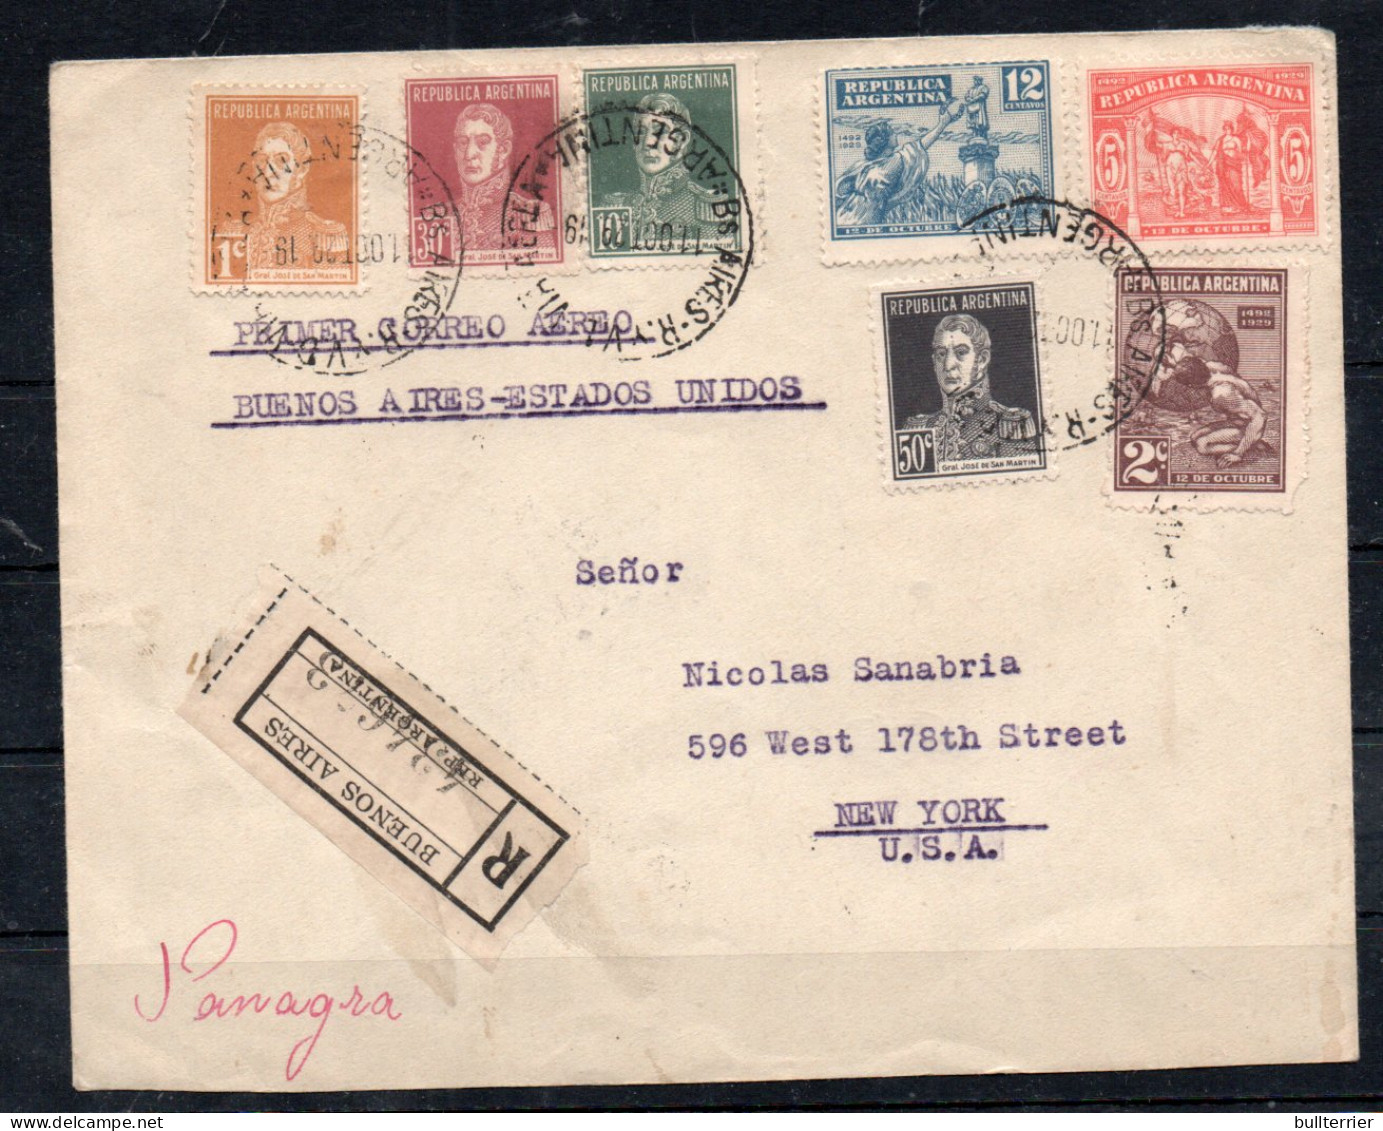 ARGENTINE - 1929  - PANAGRA REGISTERED  AIRMAIL COVER  TO NEW YORK  - Luchtpost